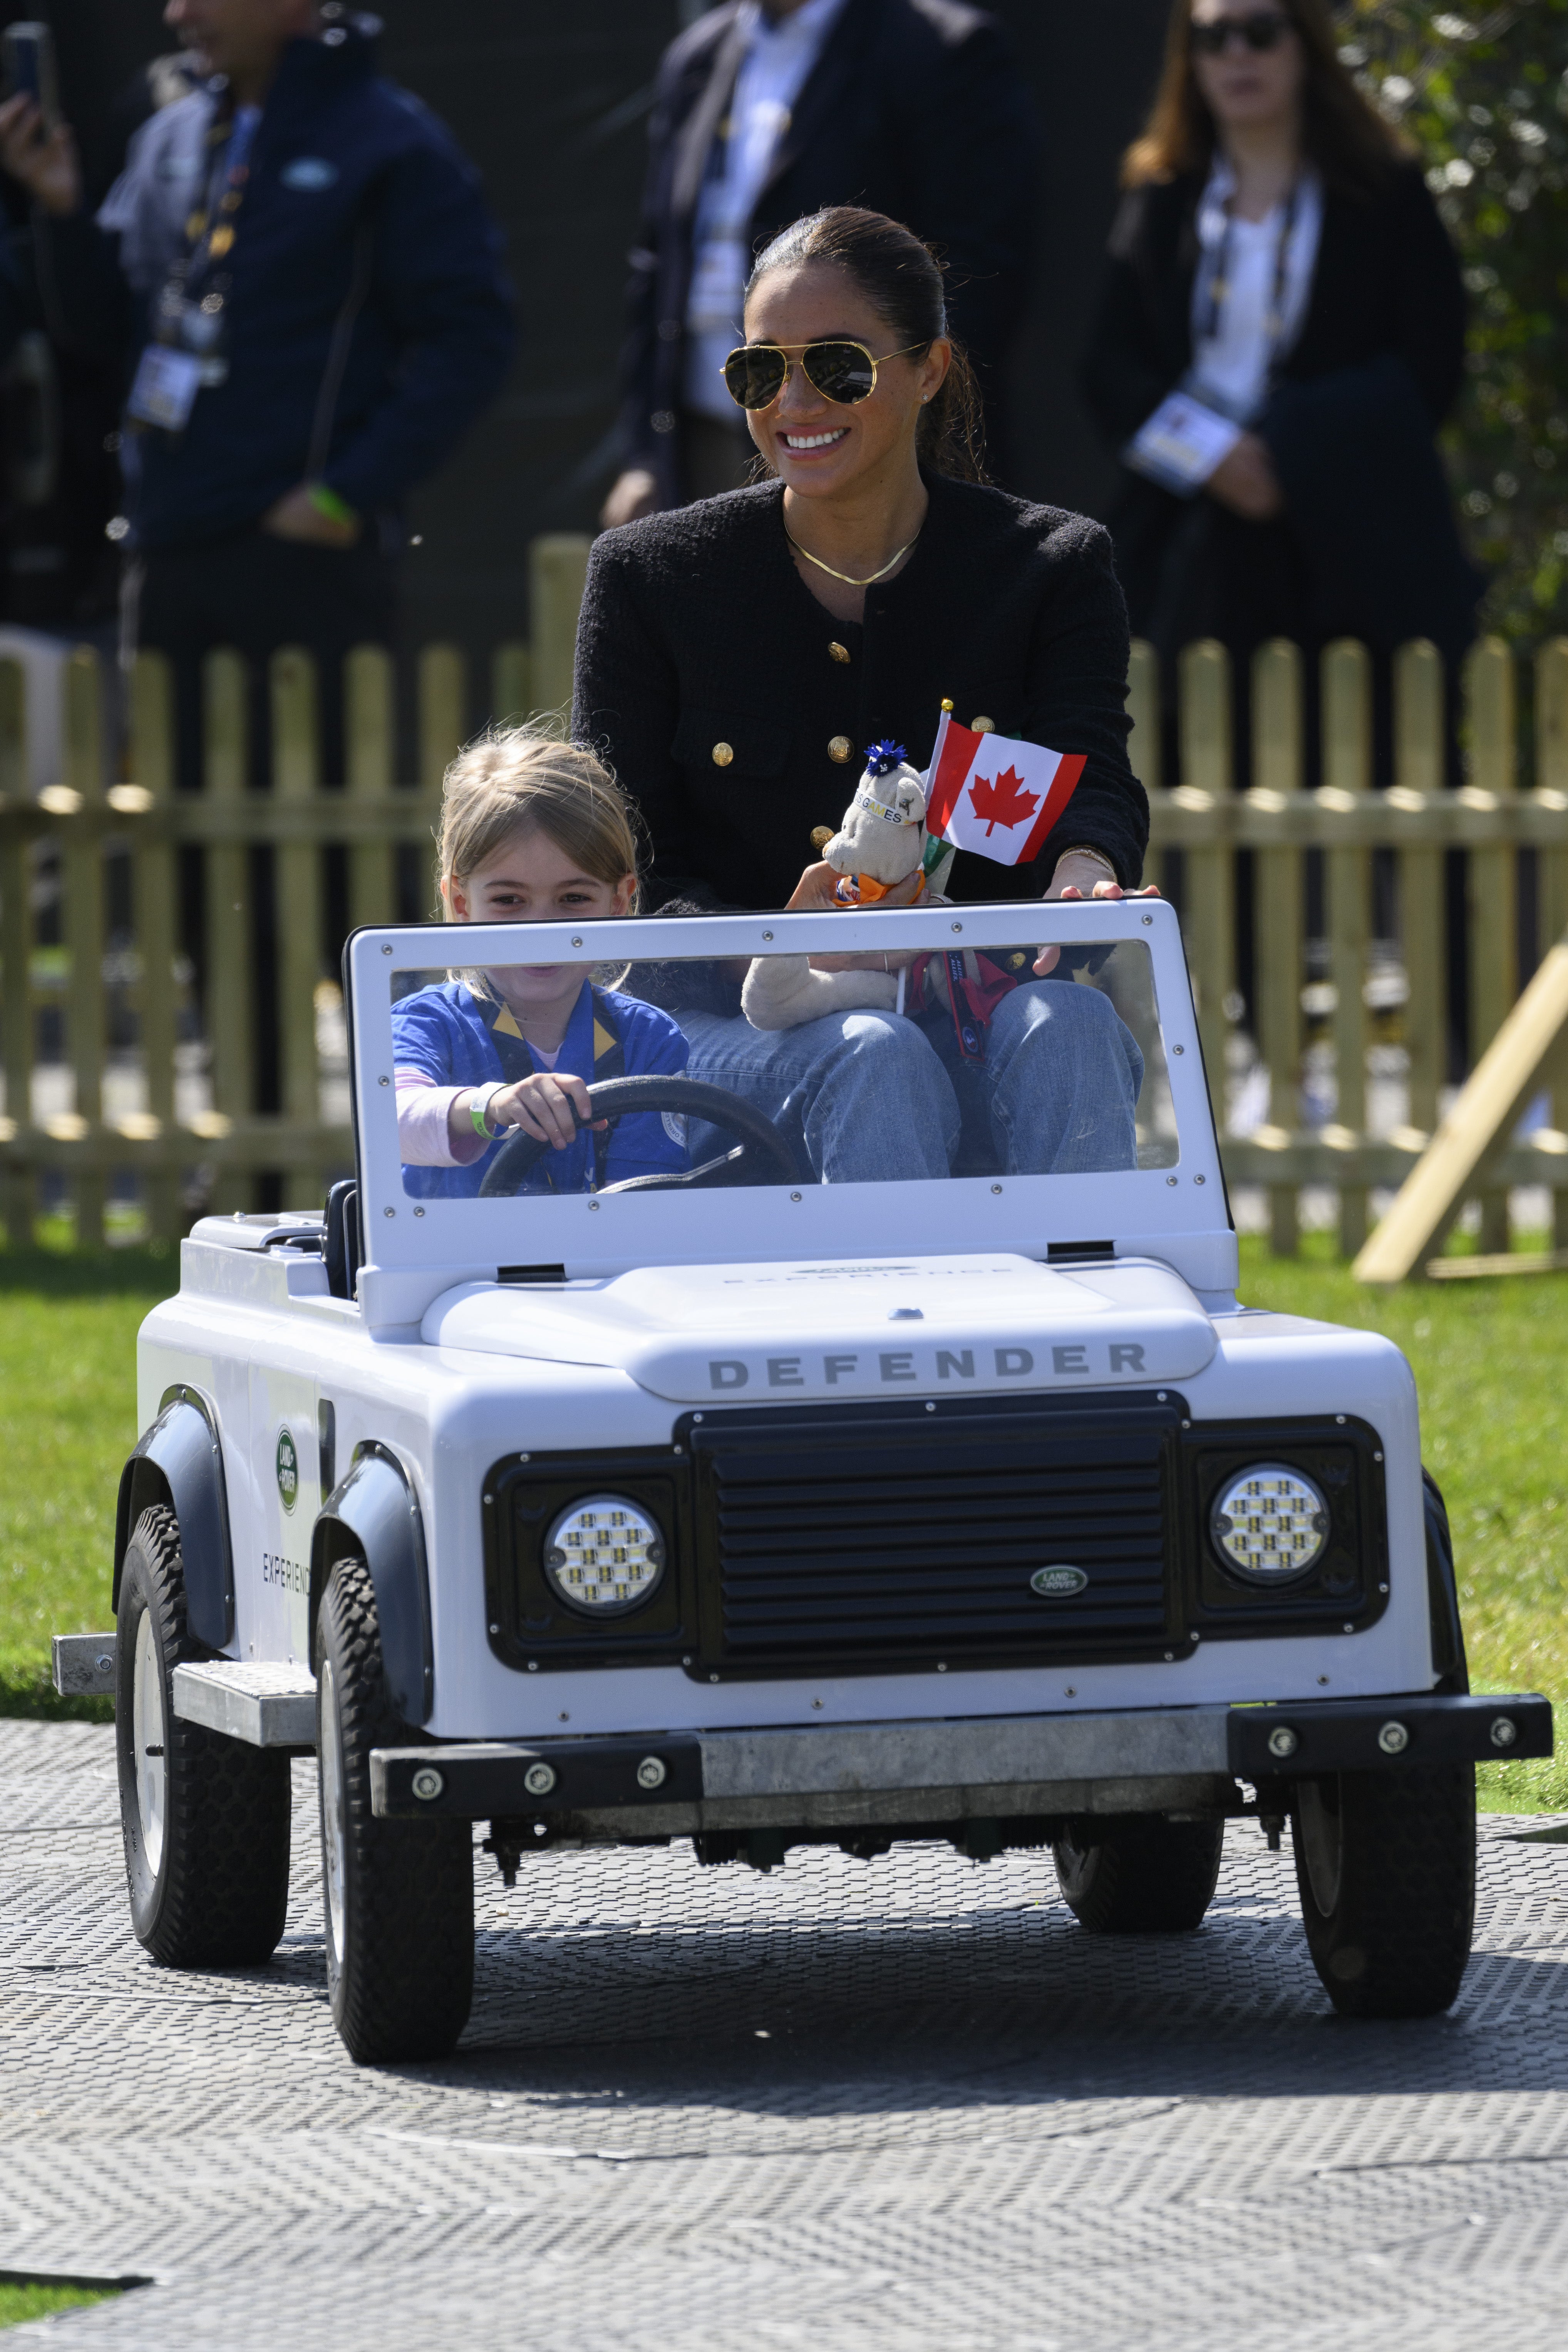 Meghan was seen carrying a Canada flag